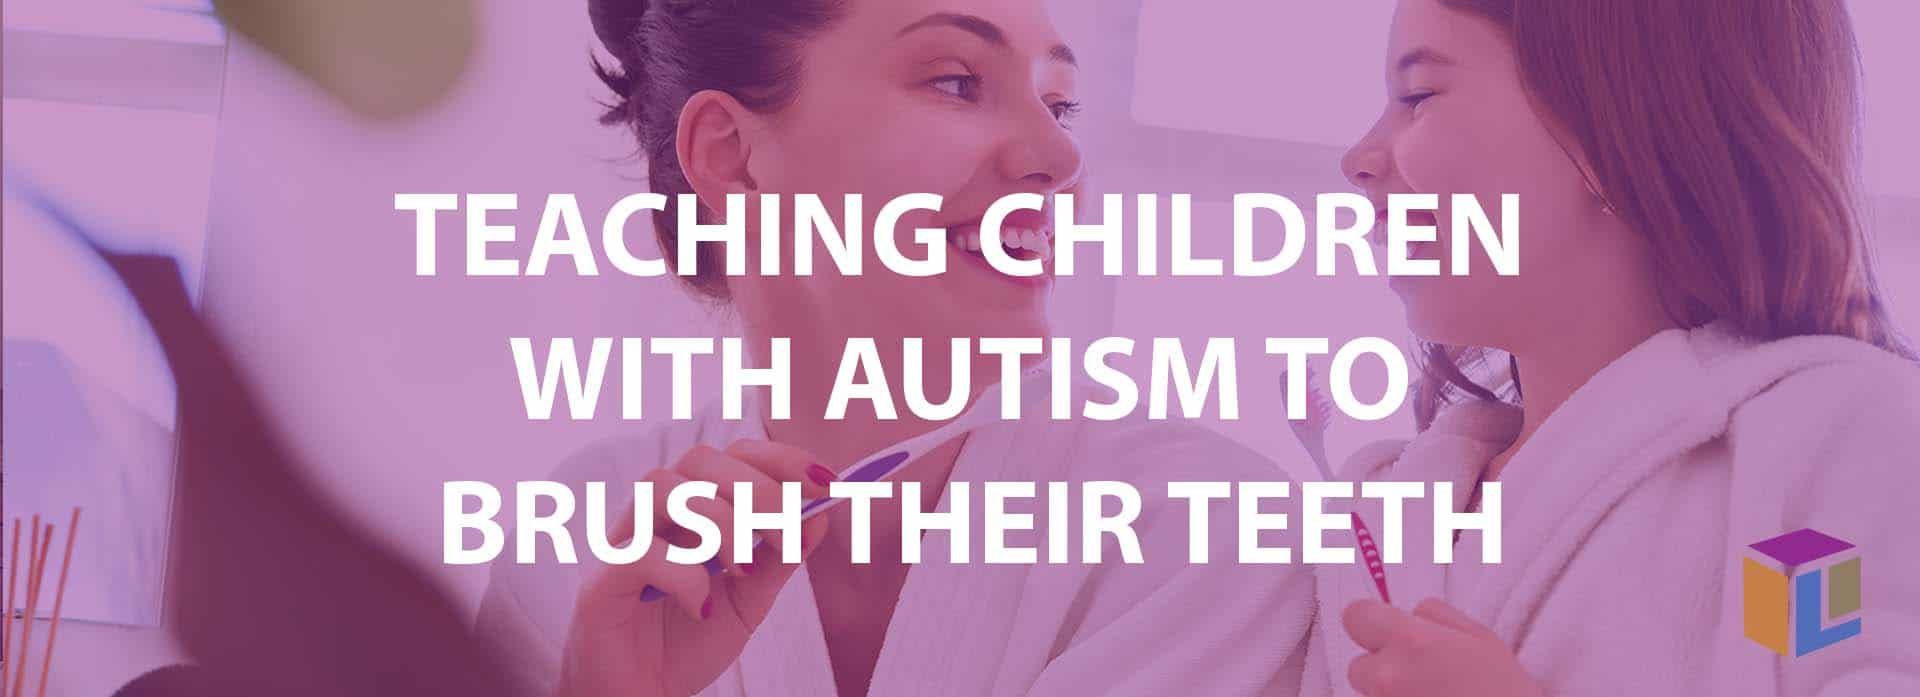 Teaching Children With Autism To Brush Their Teeth Teaching Children With Autism To Brush Their Teeth Teaching Children With Autism To Brush Their Teeth Teaching Children With Autism To Brush Their Teeth